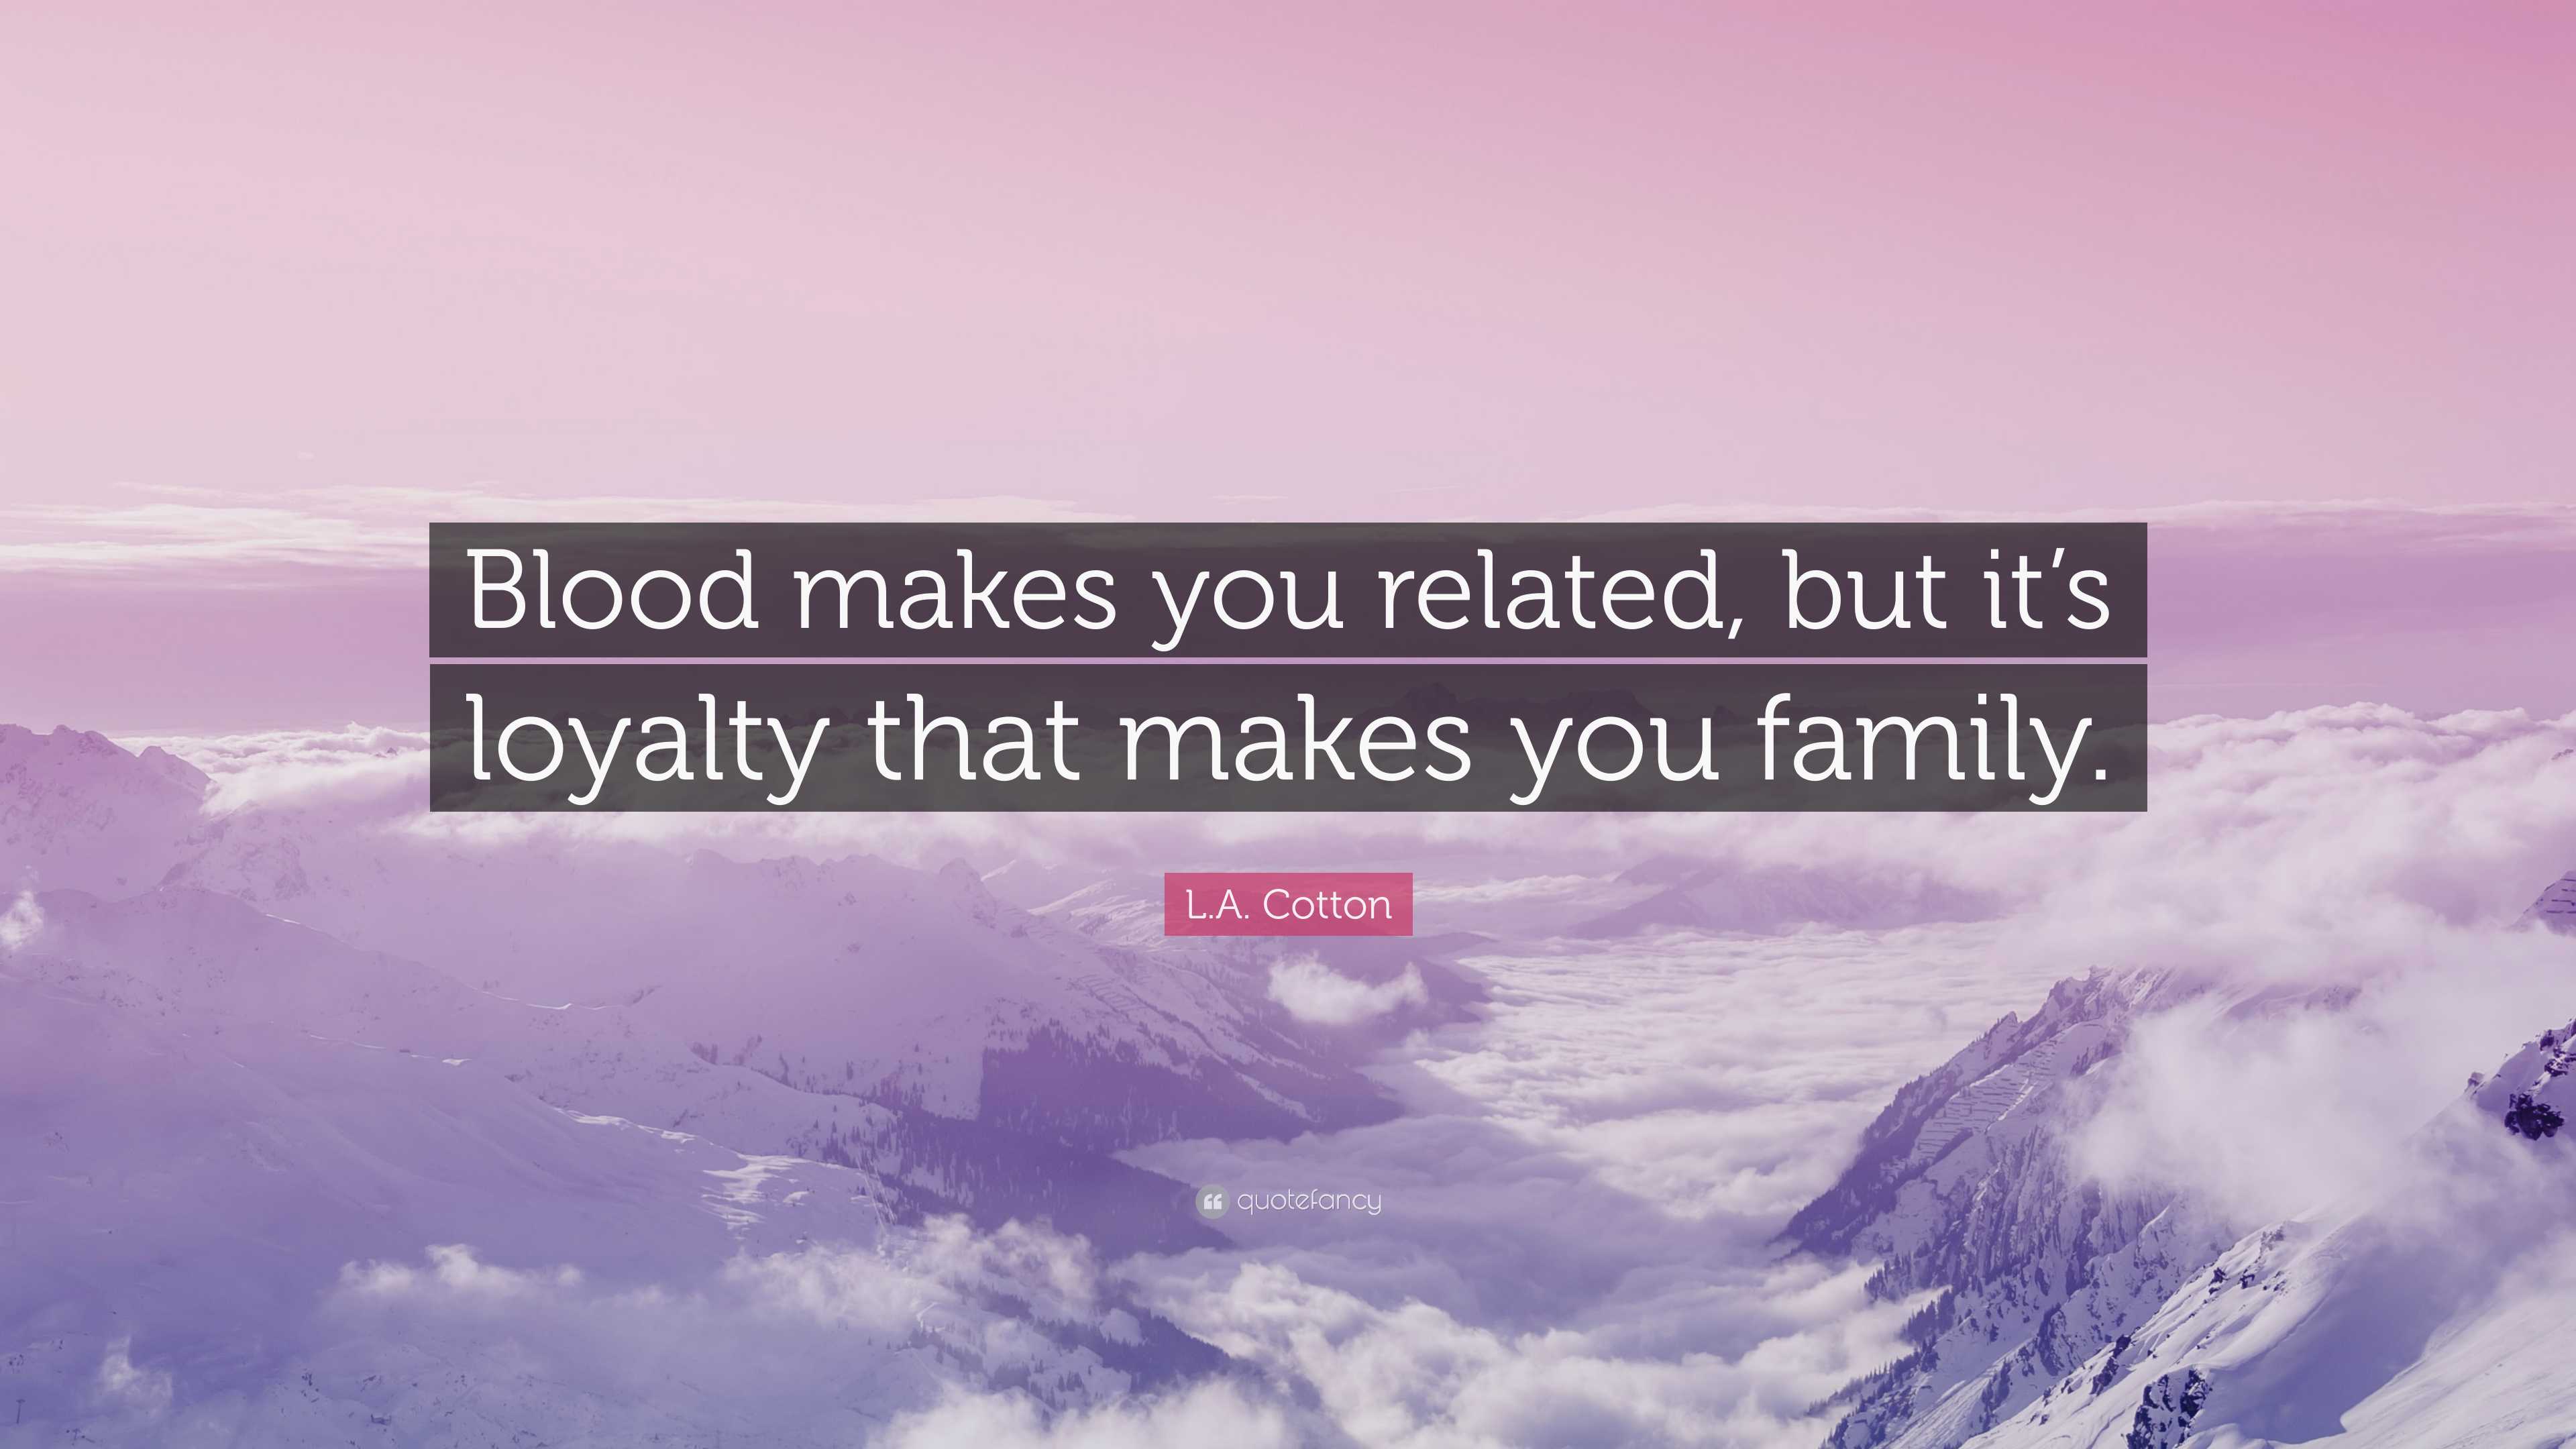 L.A. Cotton Quote: “Blood makes you related, but it's loyalty that makes  you family.”